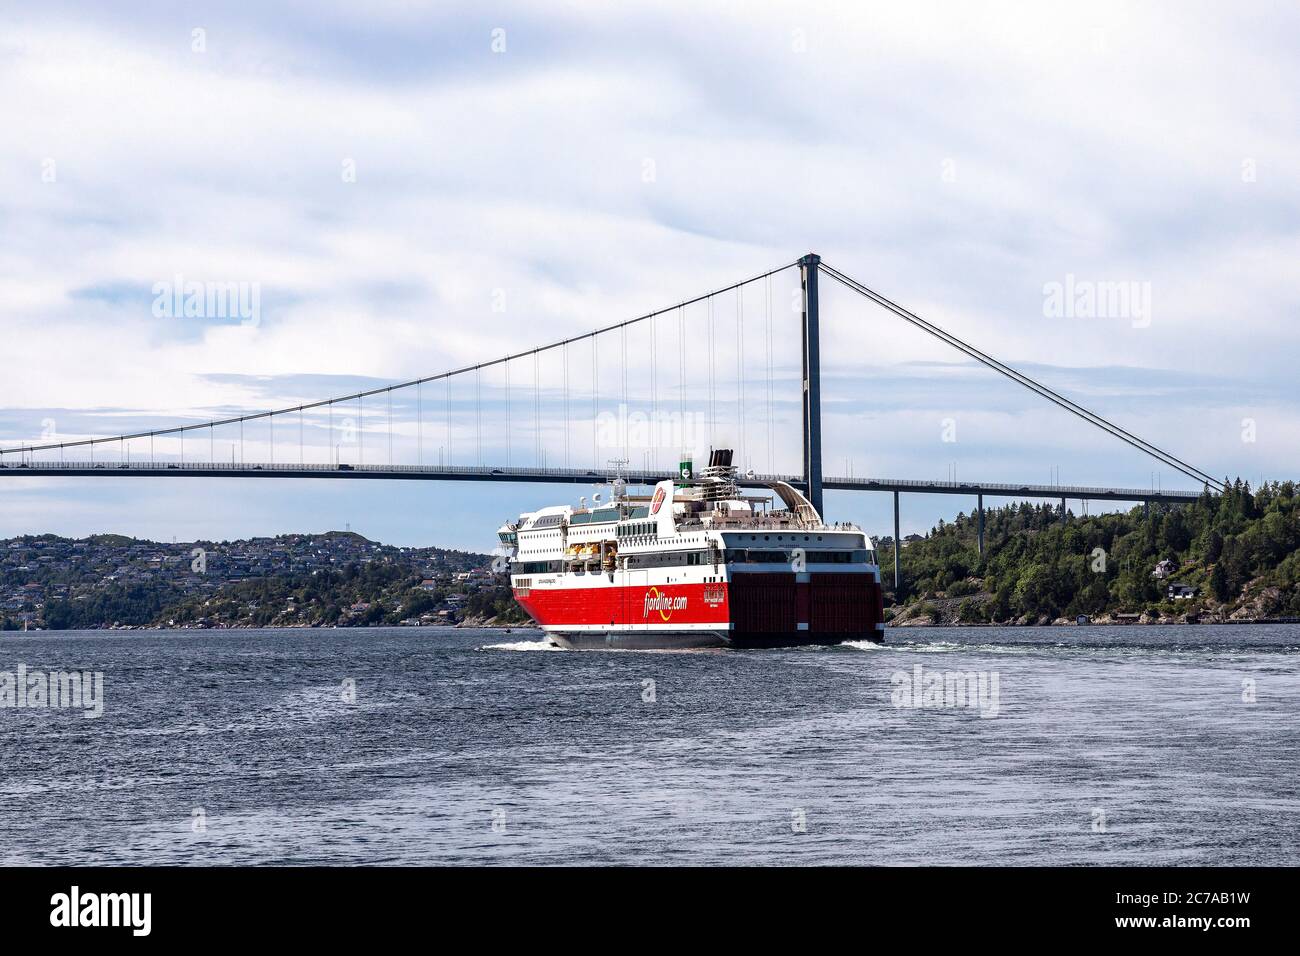 Ro-ro / passenger ship Stavangerfjord departing from the port ofBergen, Norway. Approaching the Askoey suspension bridge Stock Photo